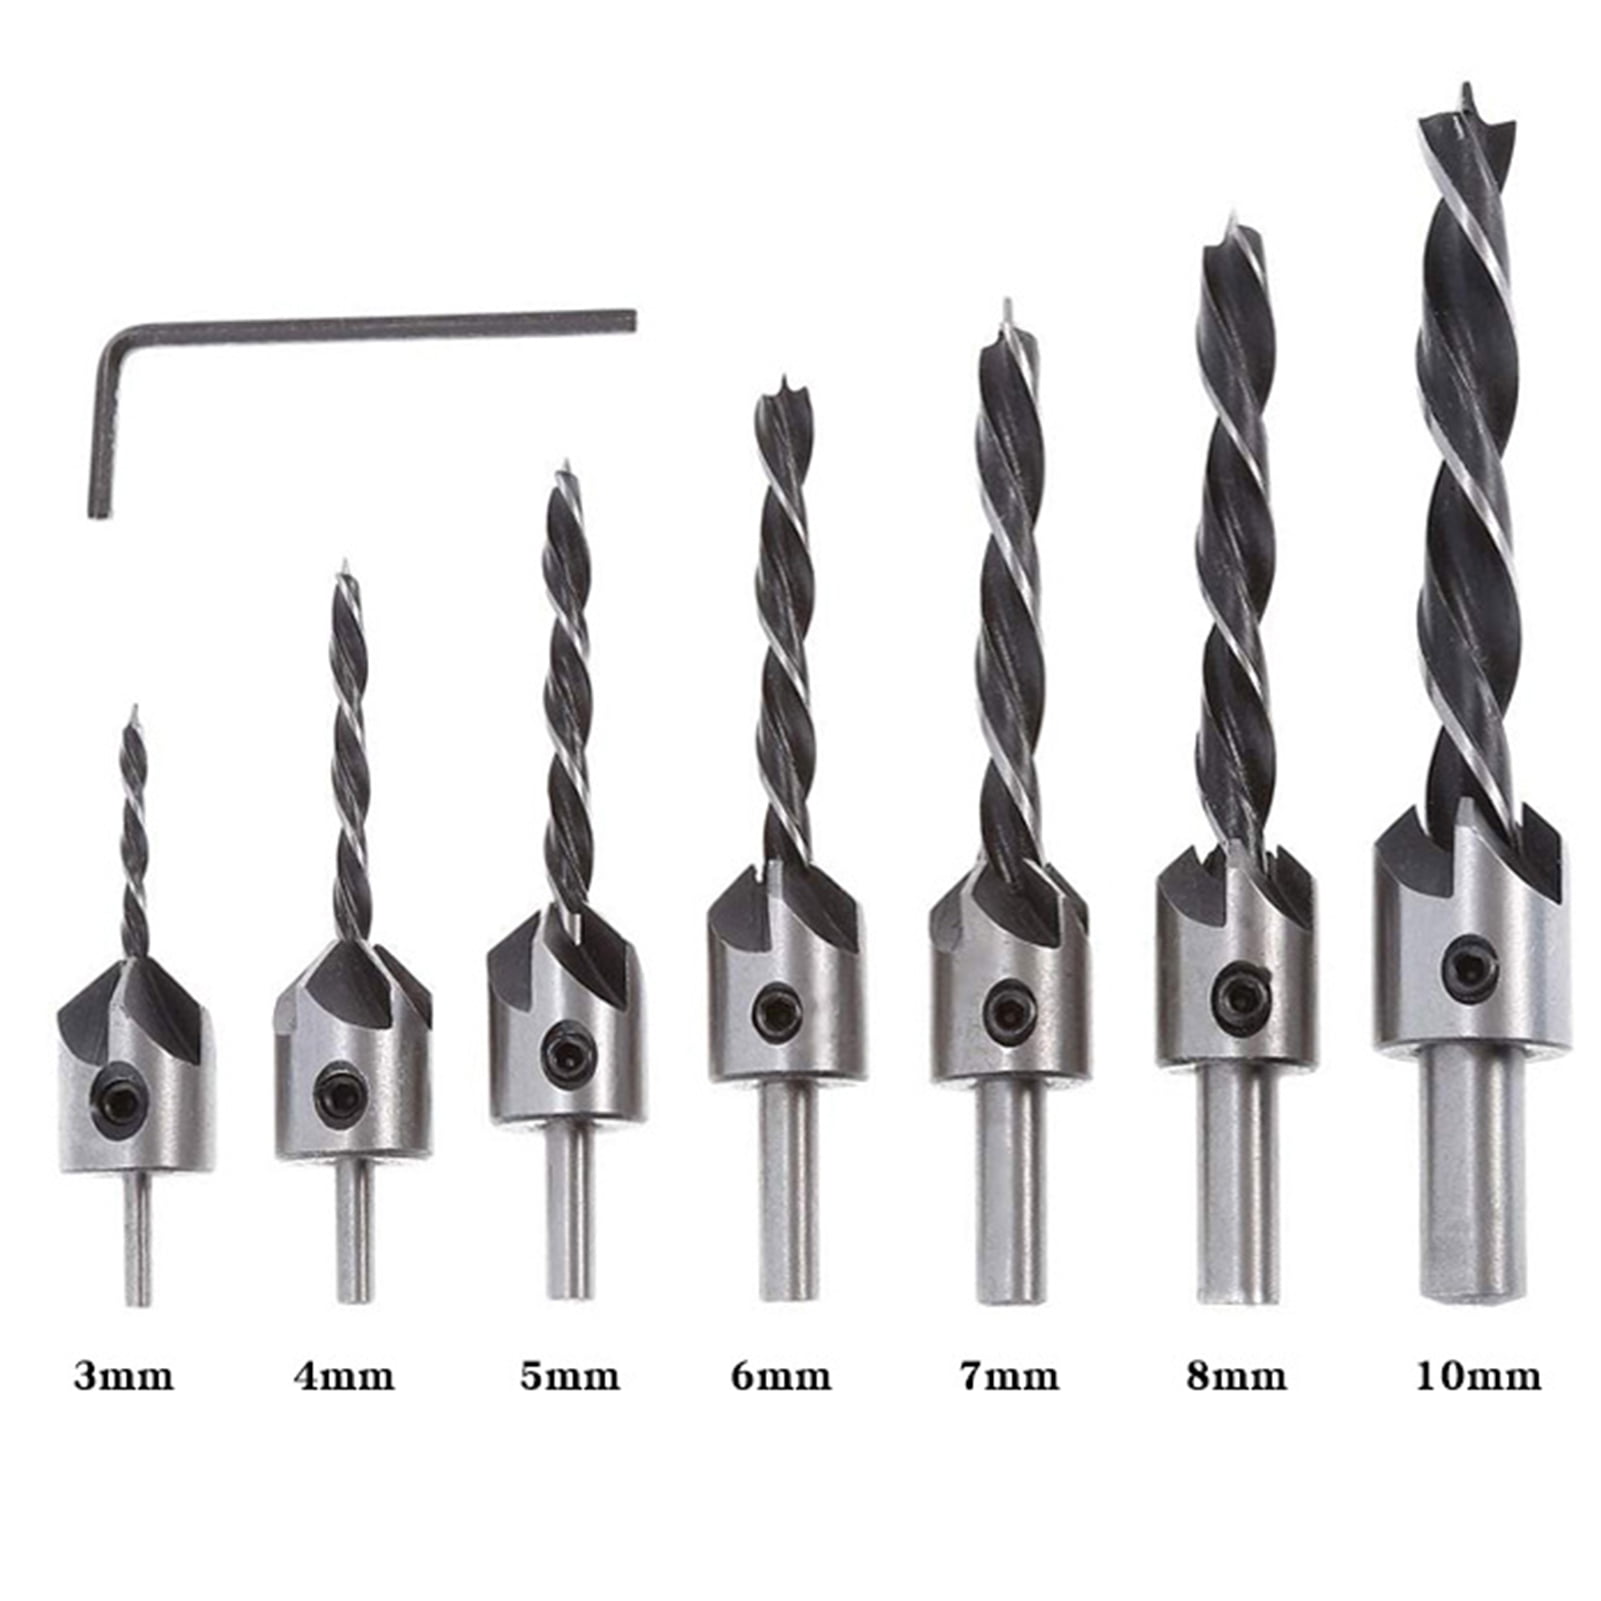 5 Flute Countersink Drill Bit Set Reamer Woodworking Chamfer New Home Tools